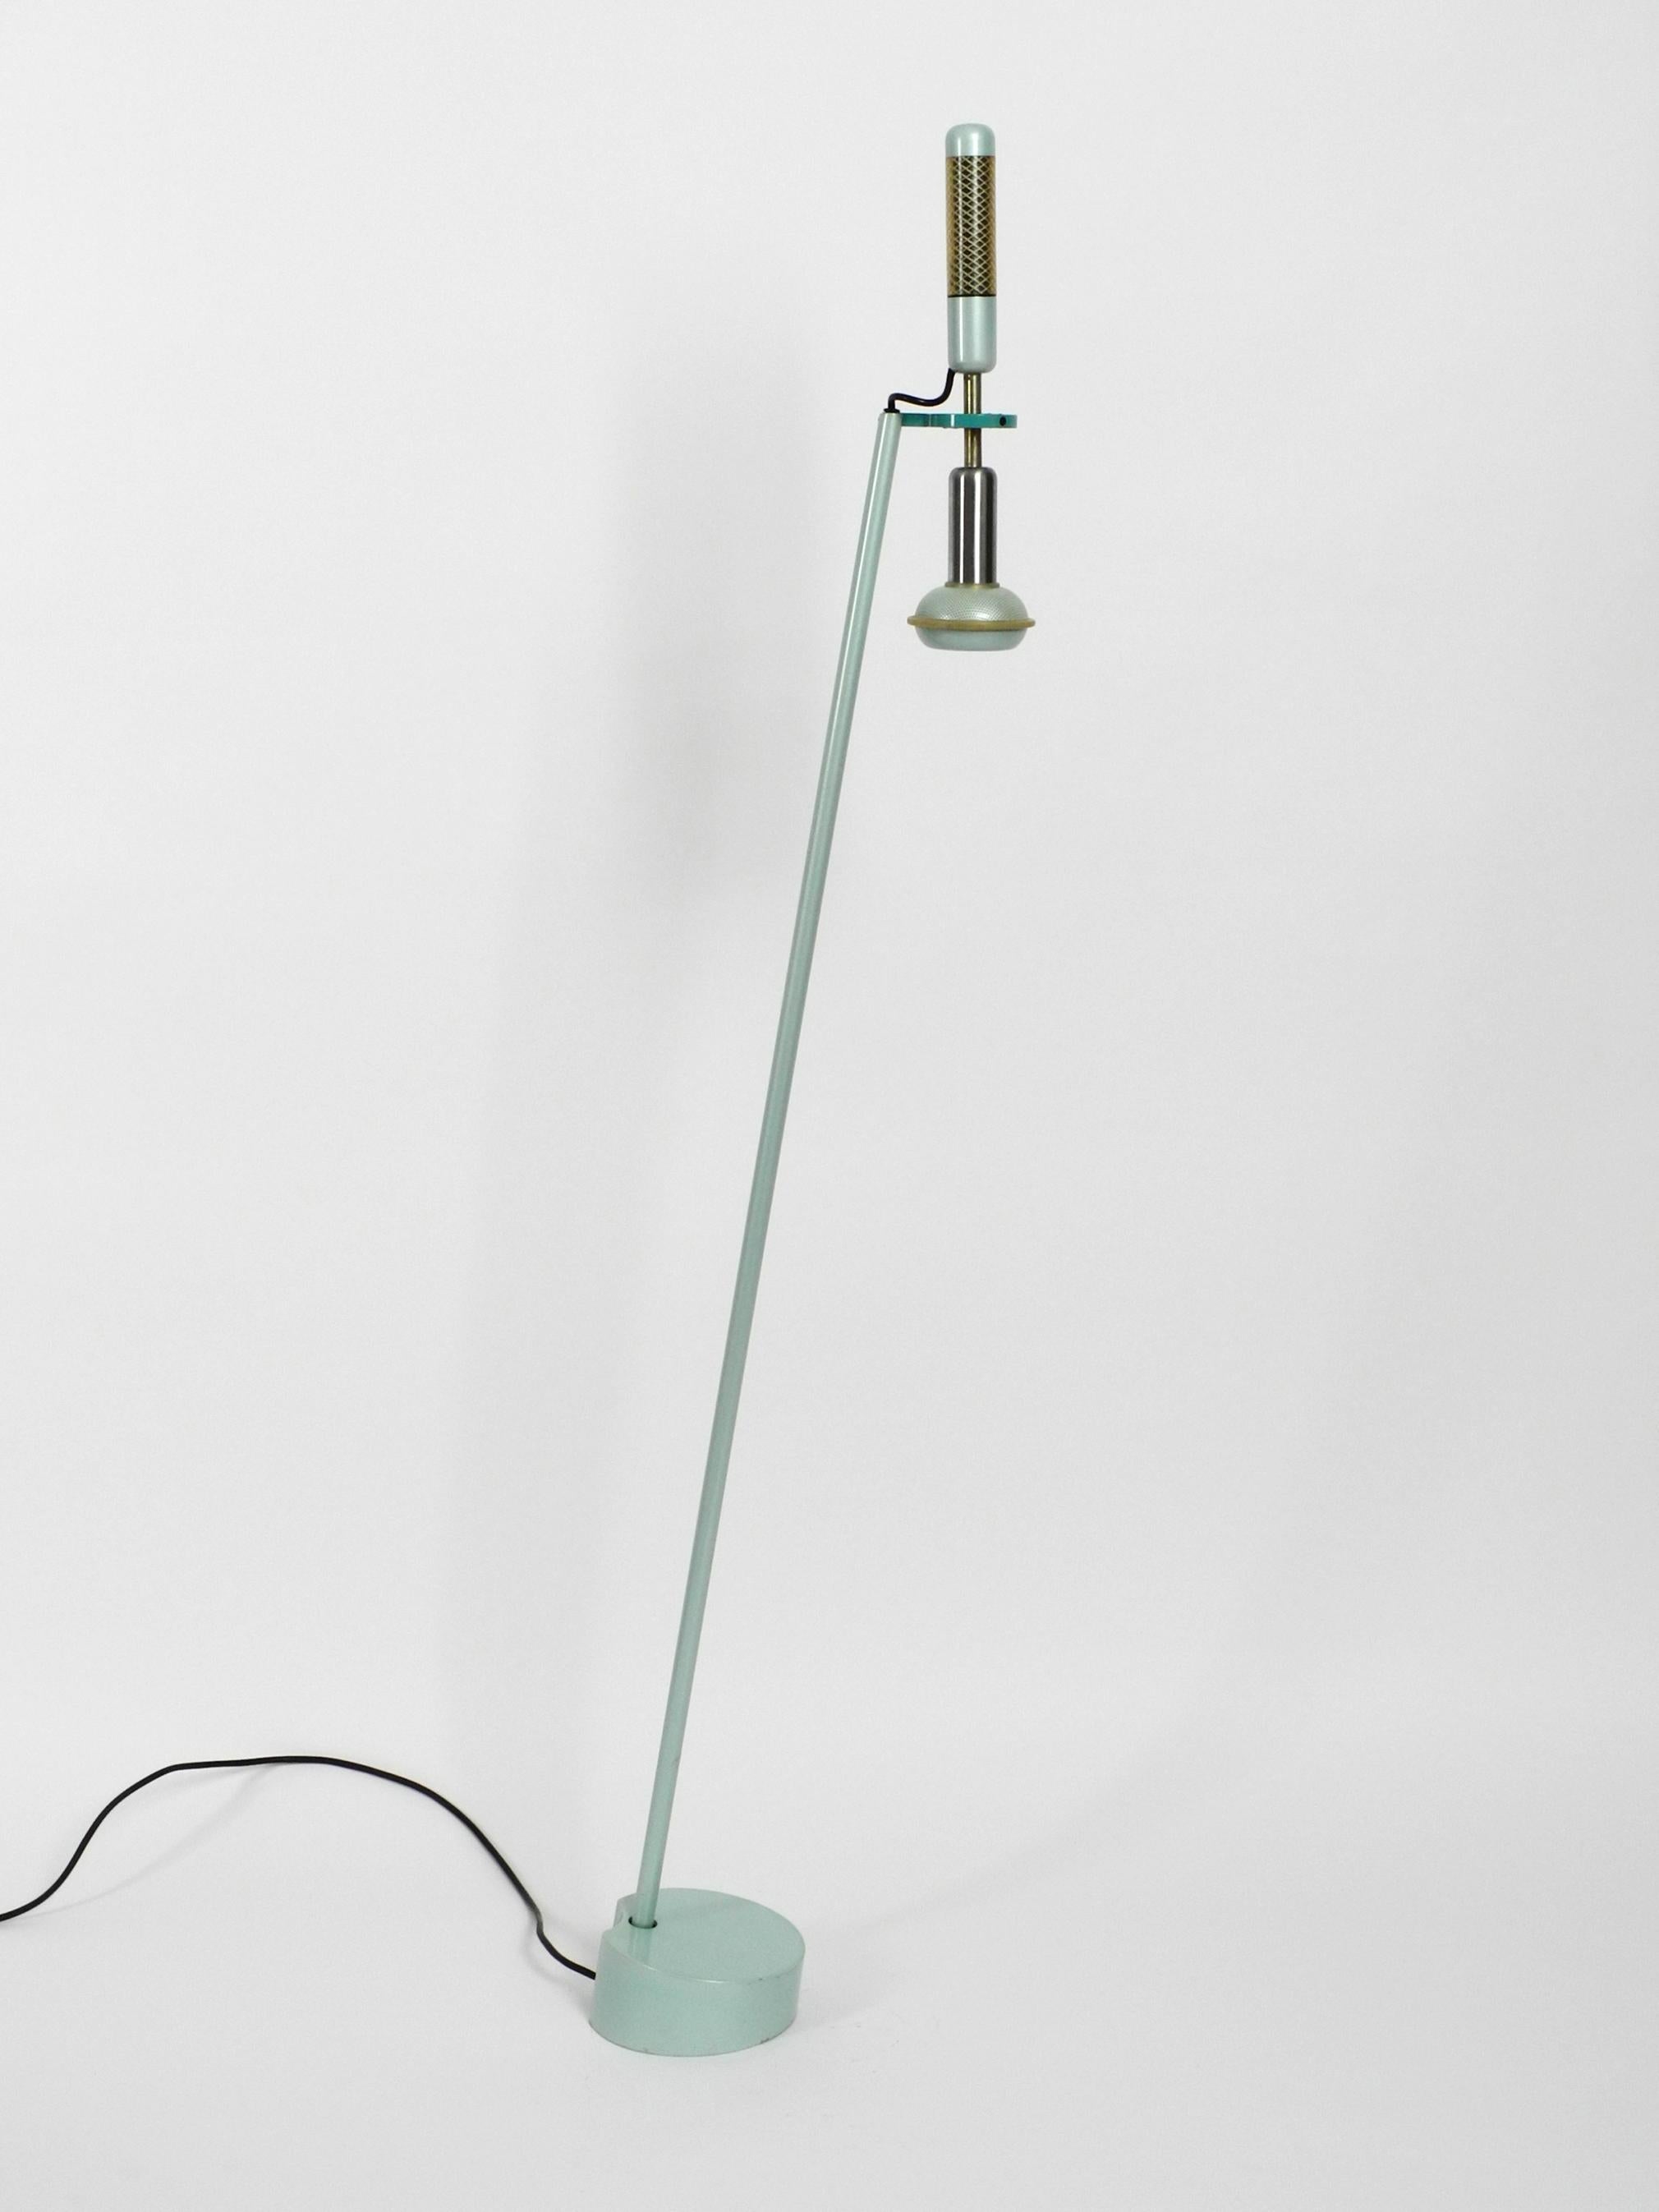 Stunning floor lamp by Achille and Pier Giacomo Castiglioni. 
Manufactured by Flos in 1981. Beautiful in turquoise green. Made in Italy.
Great minimalist Post Modern design from that time.
Completely made of metal with a very heavy base for a